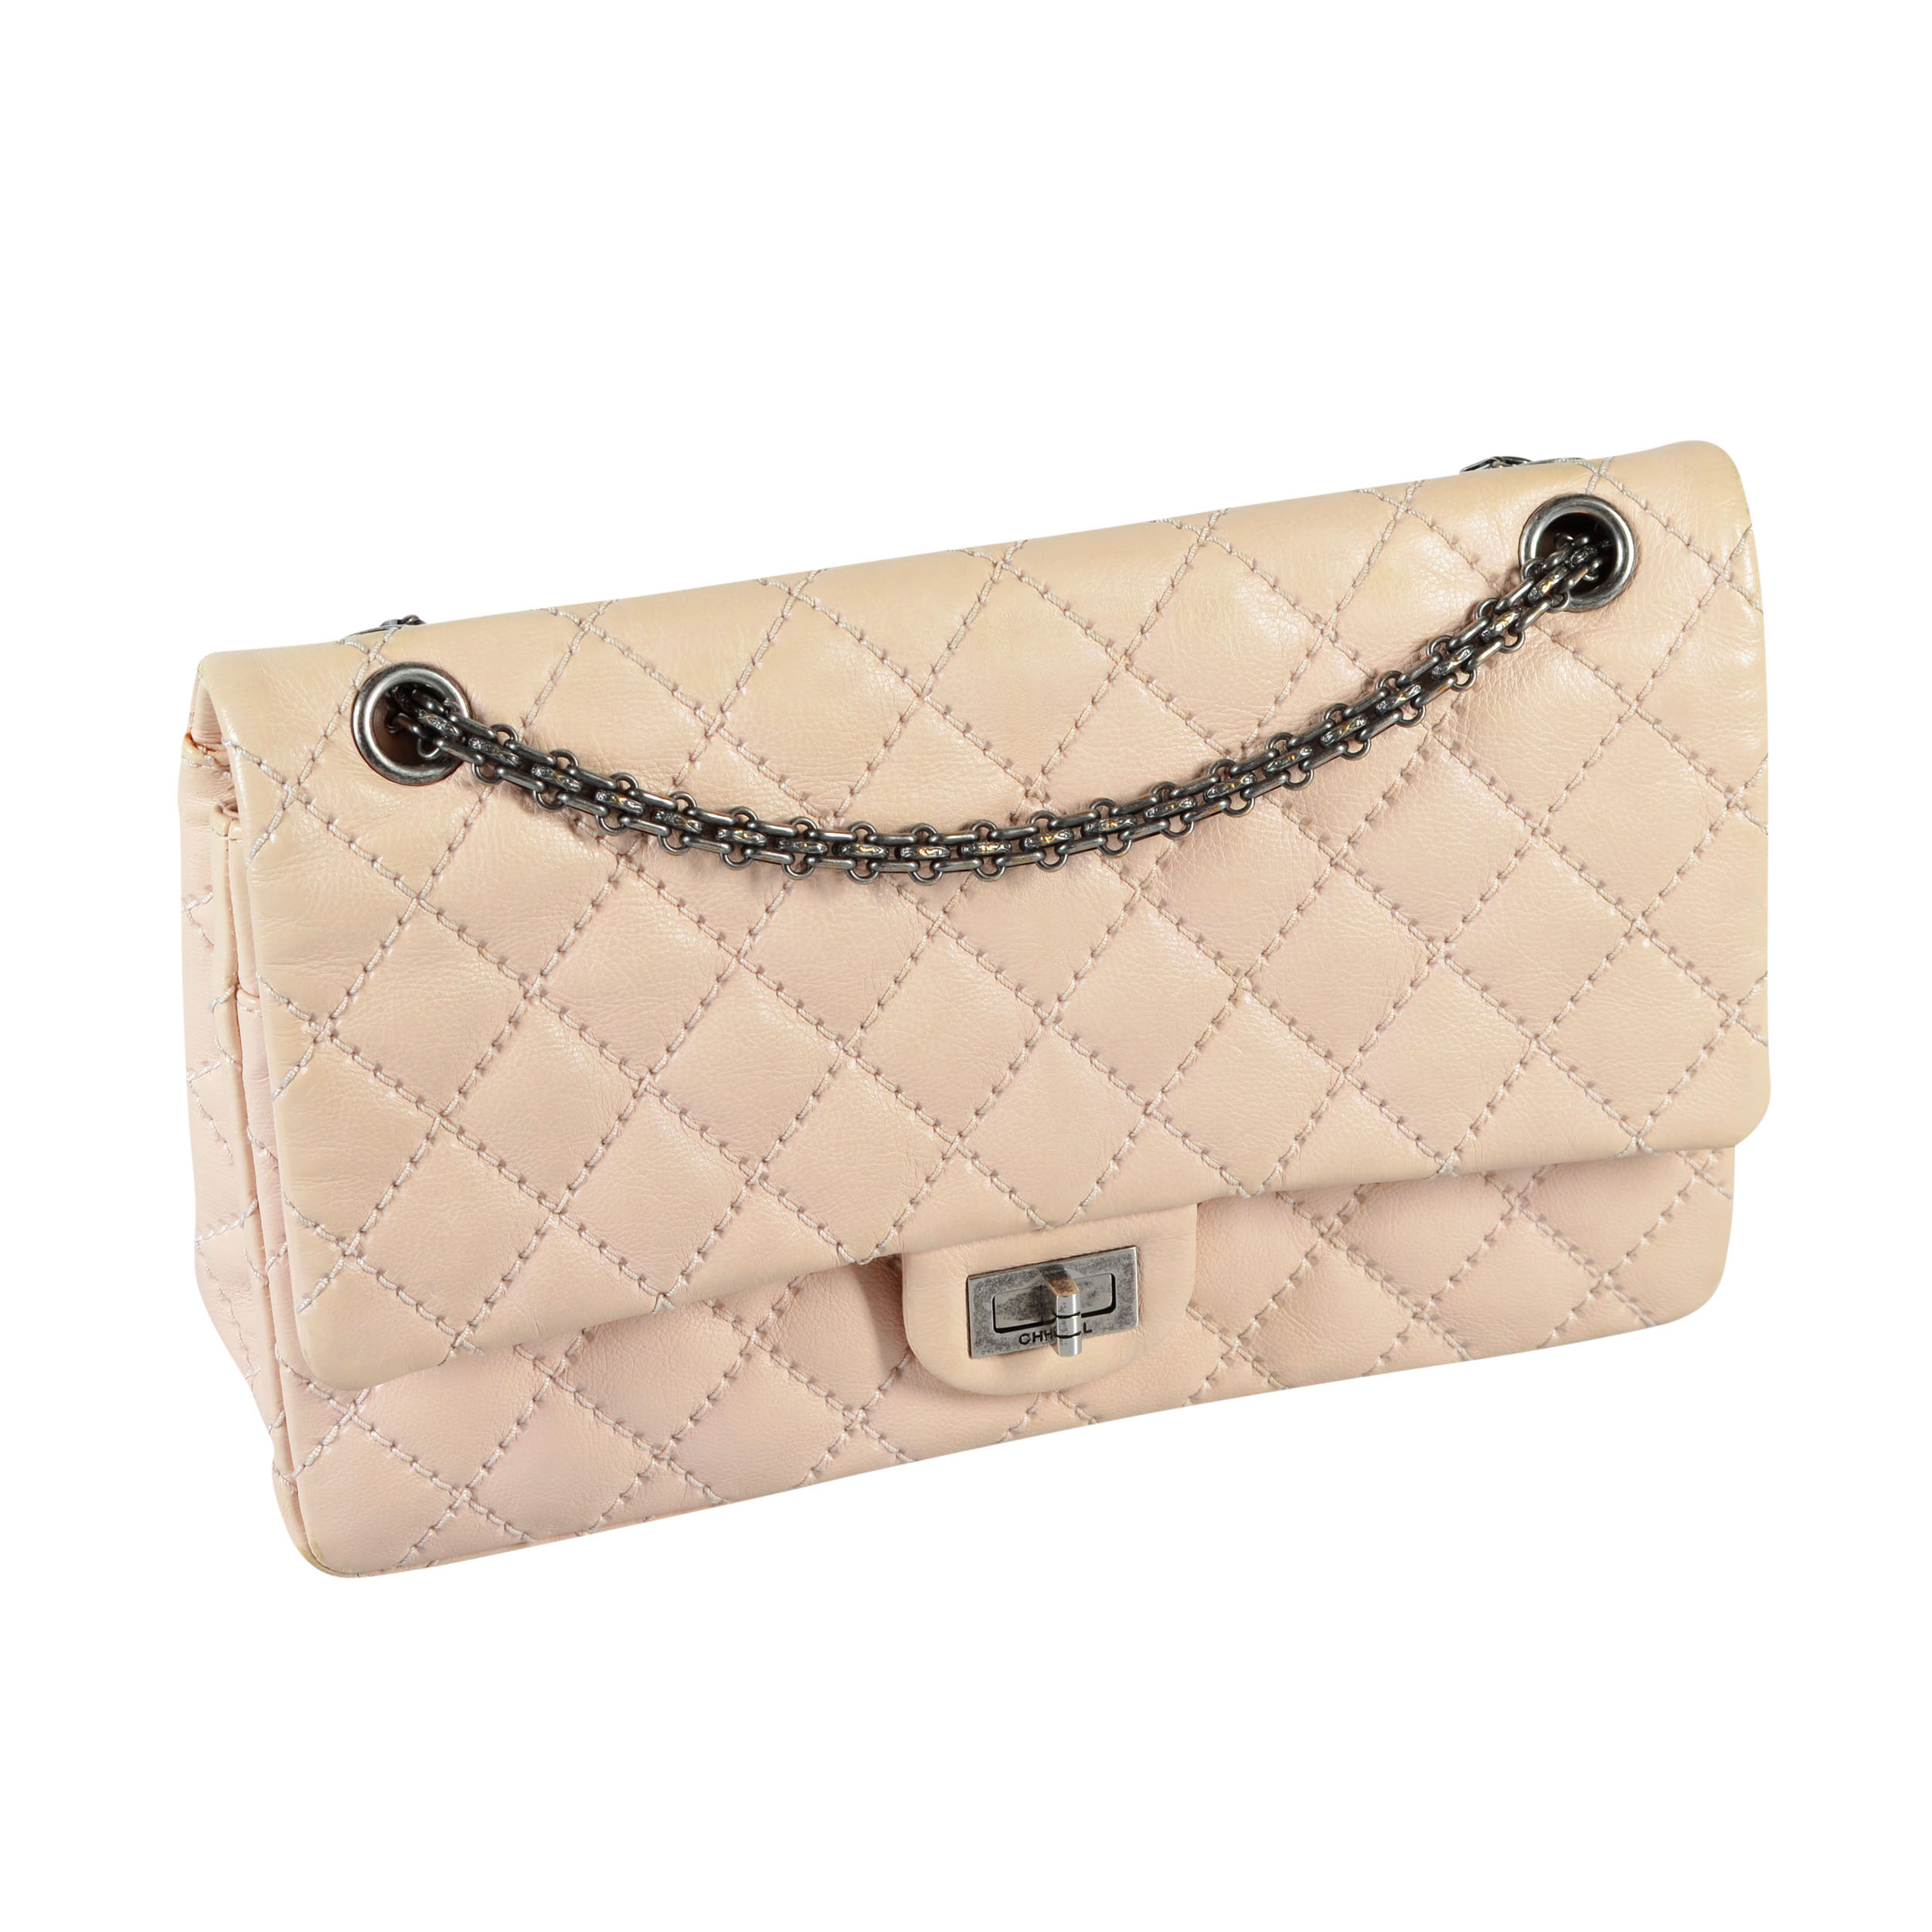 CHANEL 2.55 Reissue Flap Bag Second Hand - MyLovelyBoutique